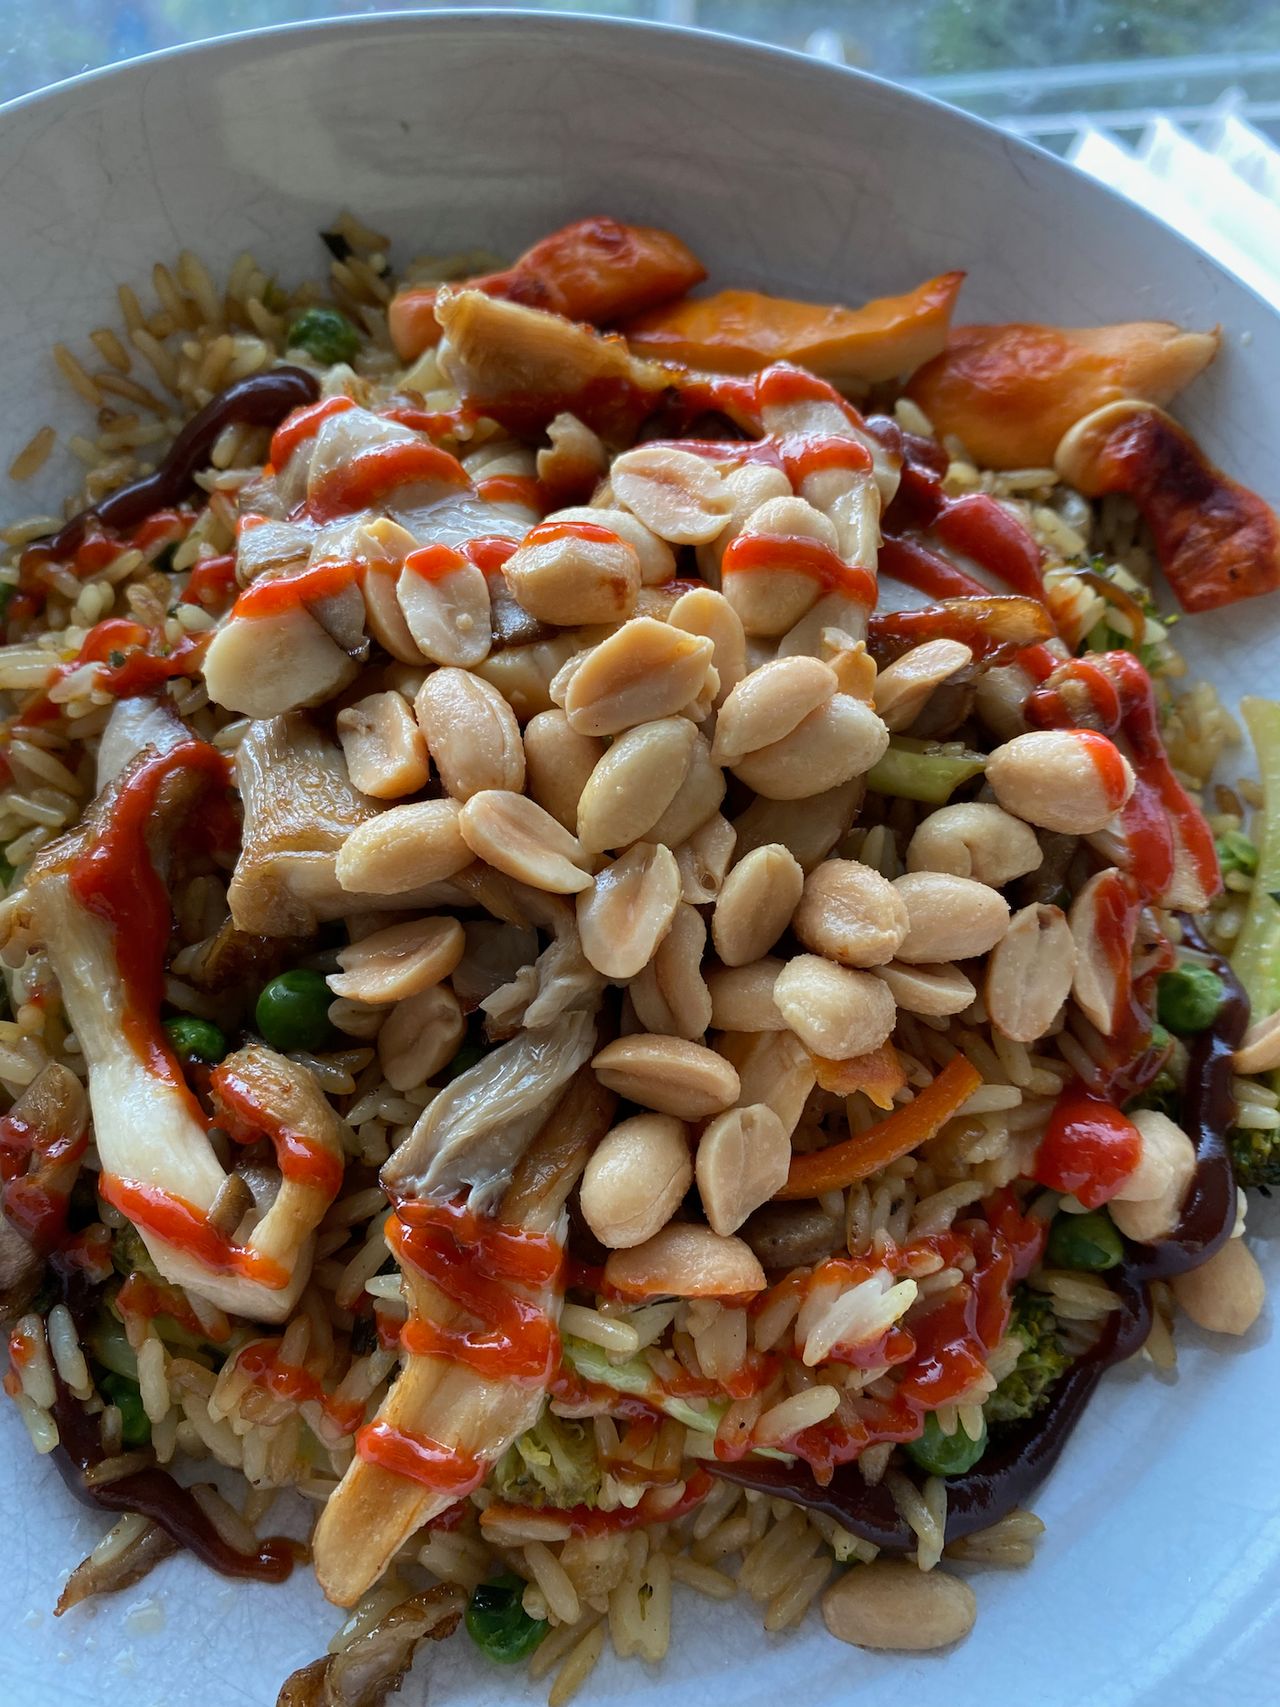 A plate of fried rice with vegetables, topped with peanuts and red sriracha sauce.